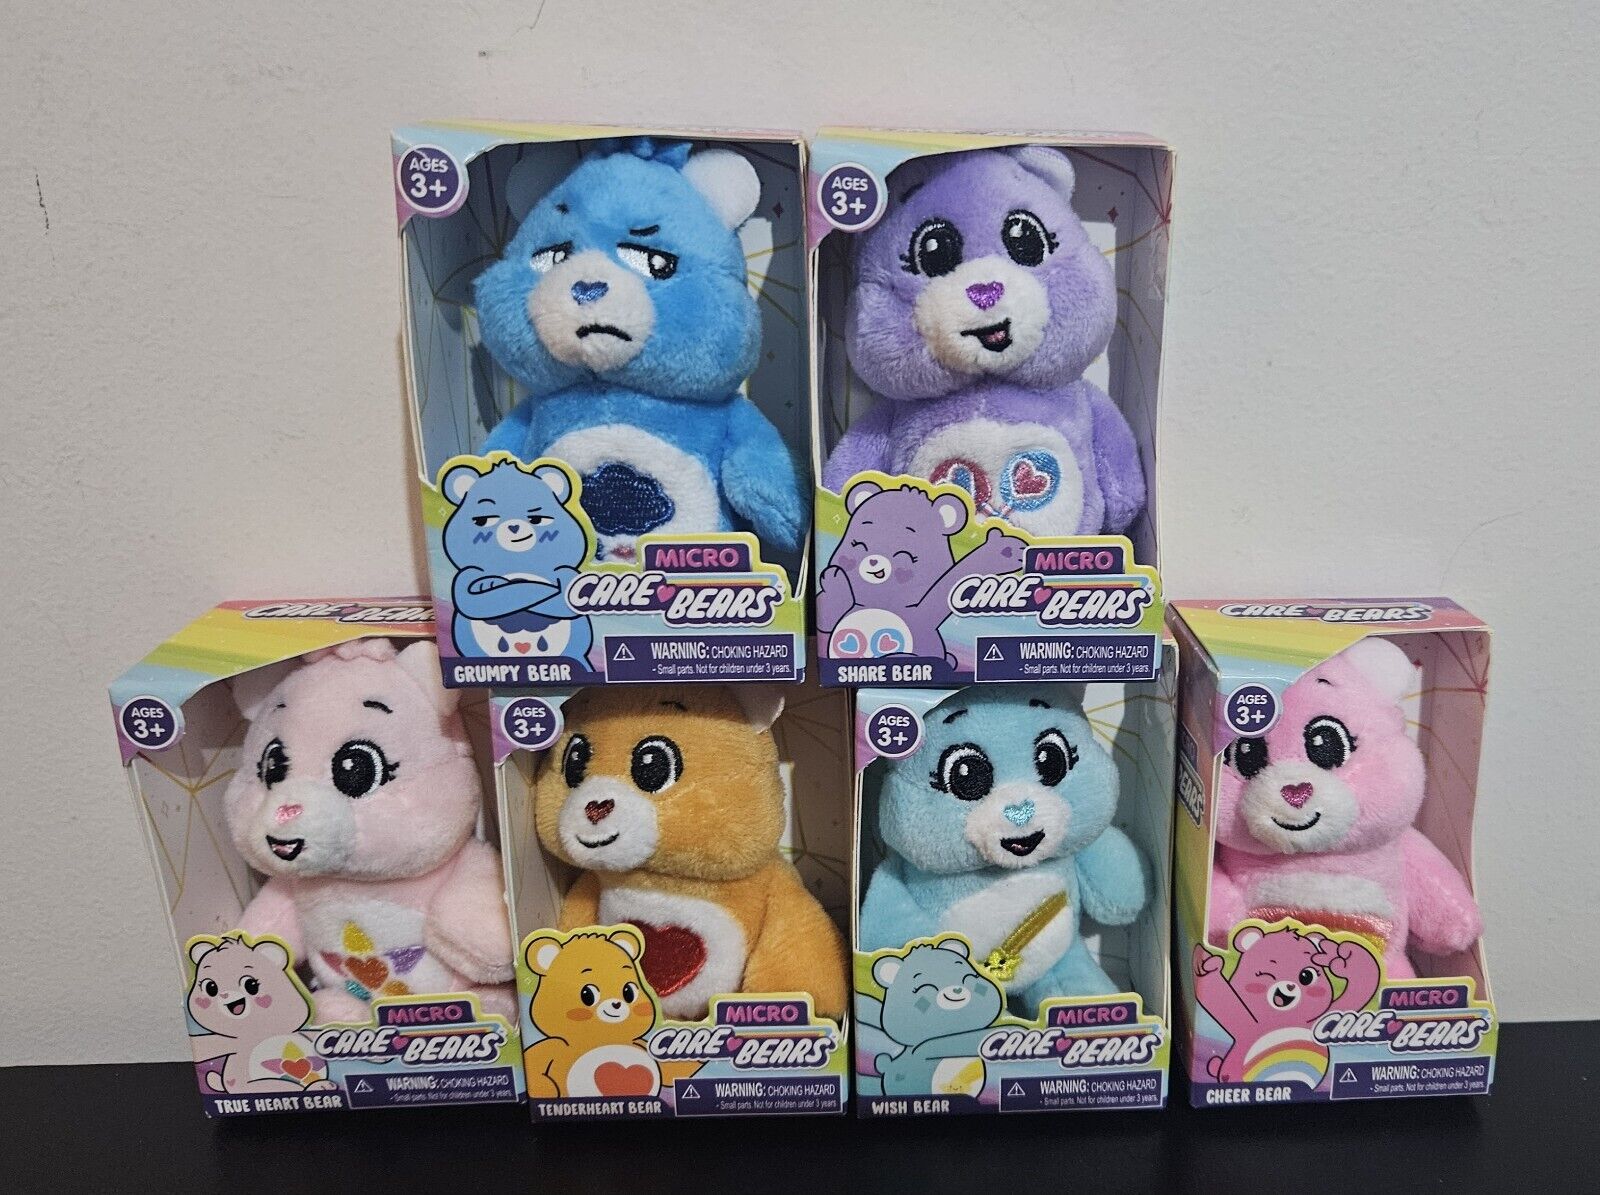 Micro Care Bears 3 Inch Plush ~ Brand New In Box ~ Complete Set of 6